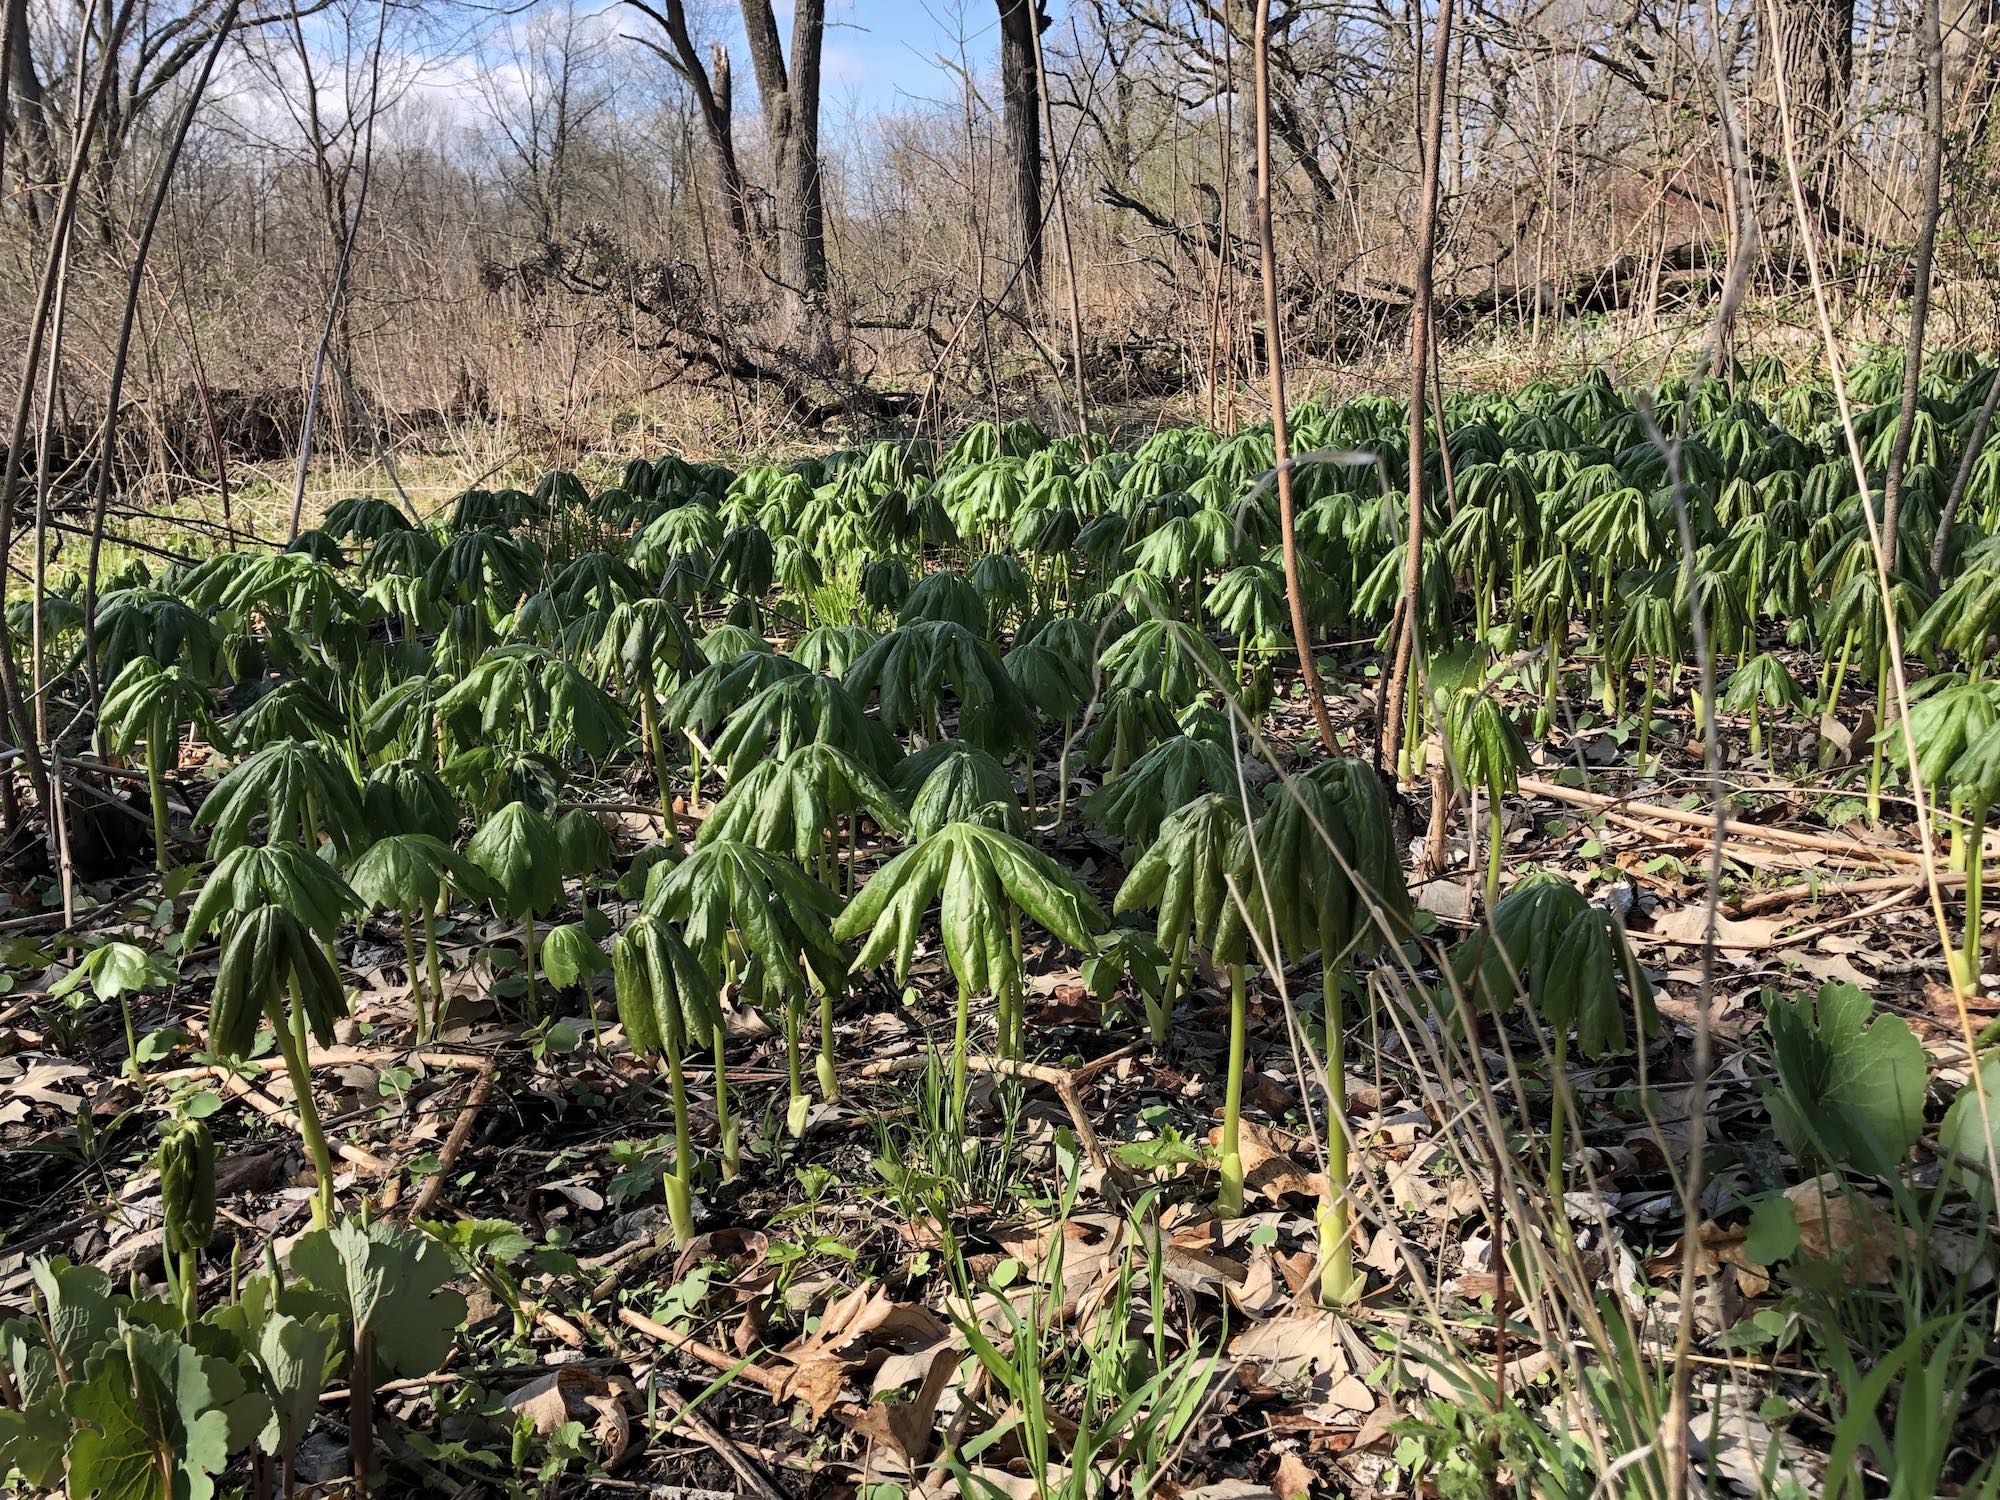 Mayapple on hill near Council Ring on April 23, 2019.